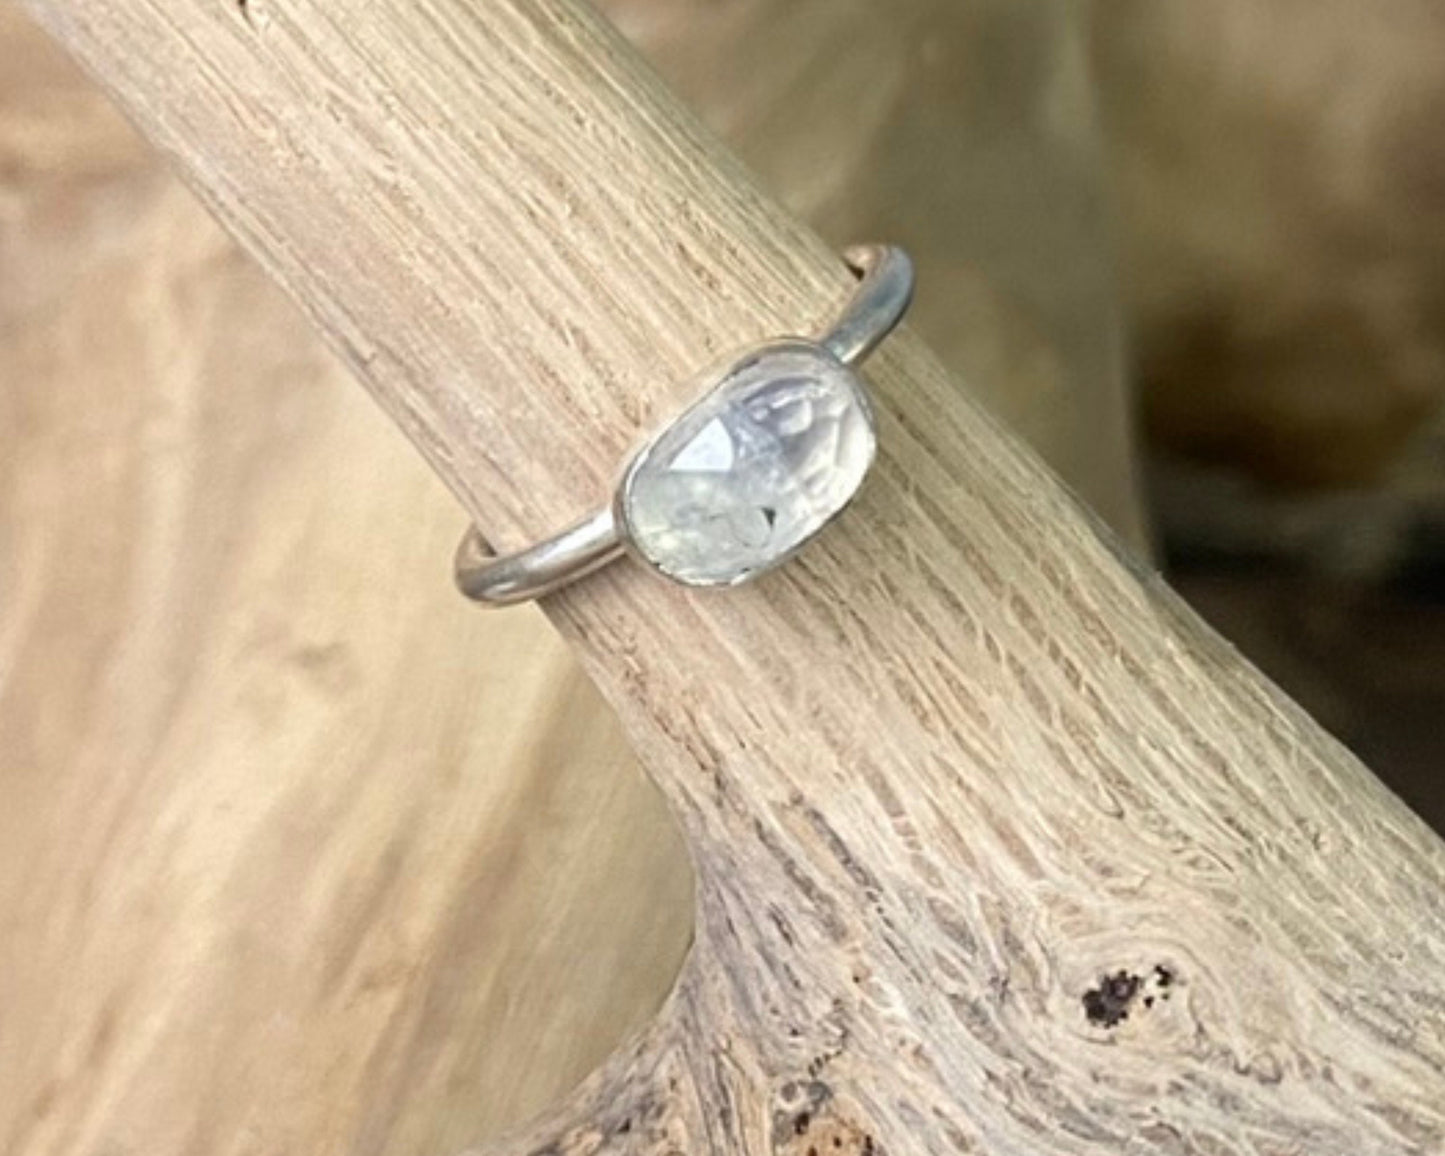 UK Size L Genuine Freeform Moonstone Stacking Ring, One of a Kind Handmade 925 Sterling Silver Ring, Gemstone Ring, Crystal Ring